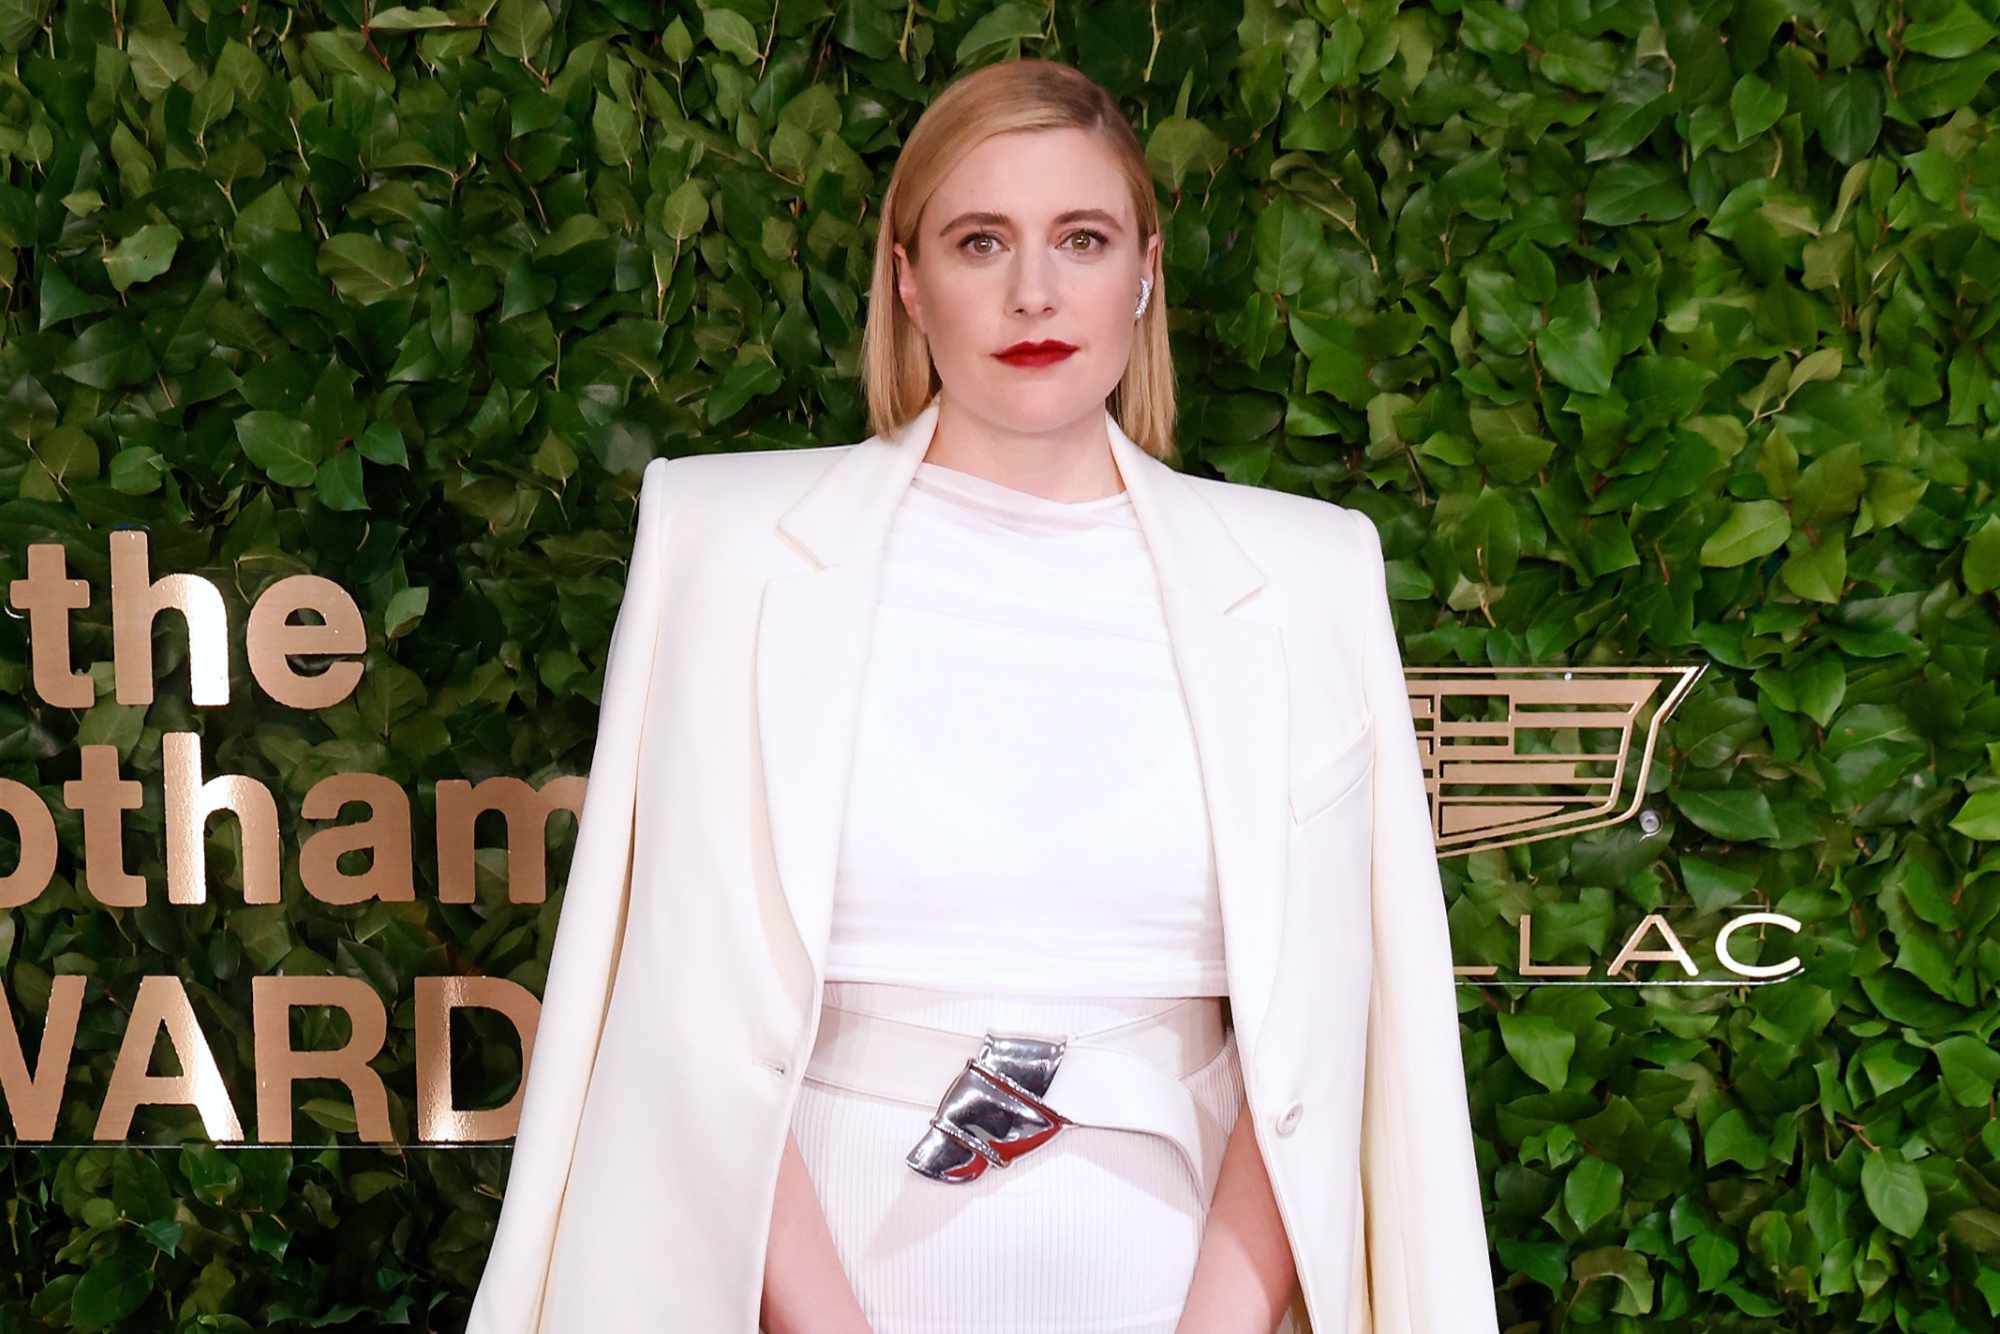 Greta Gerwig's red carpet look at the 2023 Gotham Fashion Awards, including a white blazer, white shirt, silver belt, and white skirt